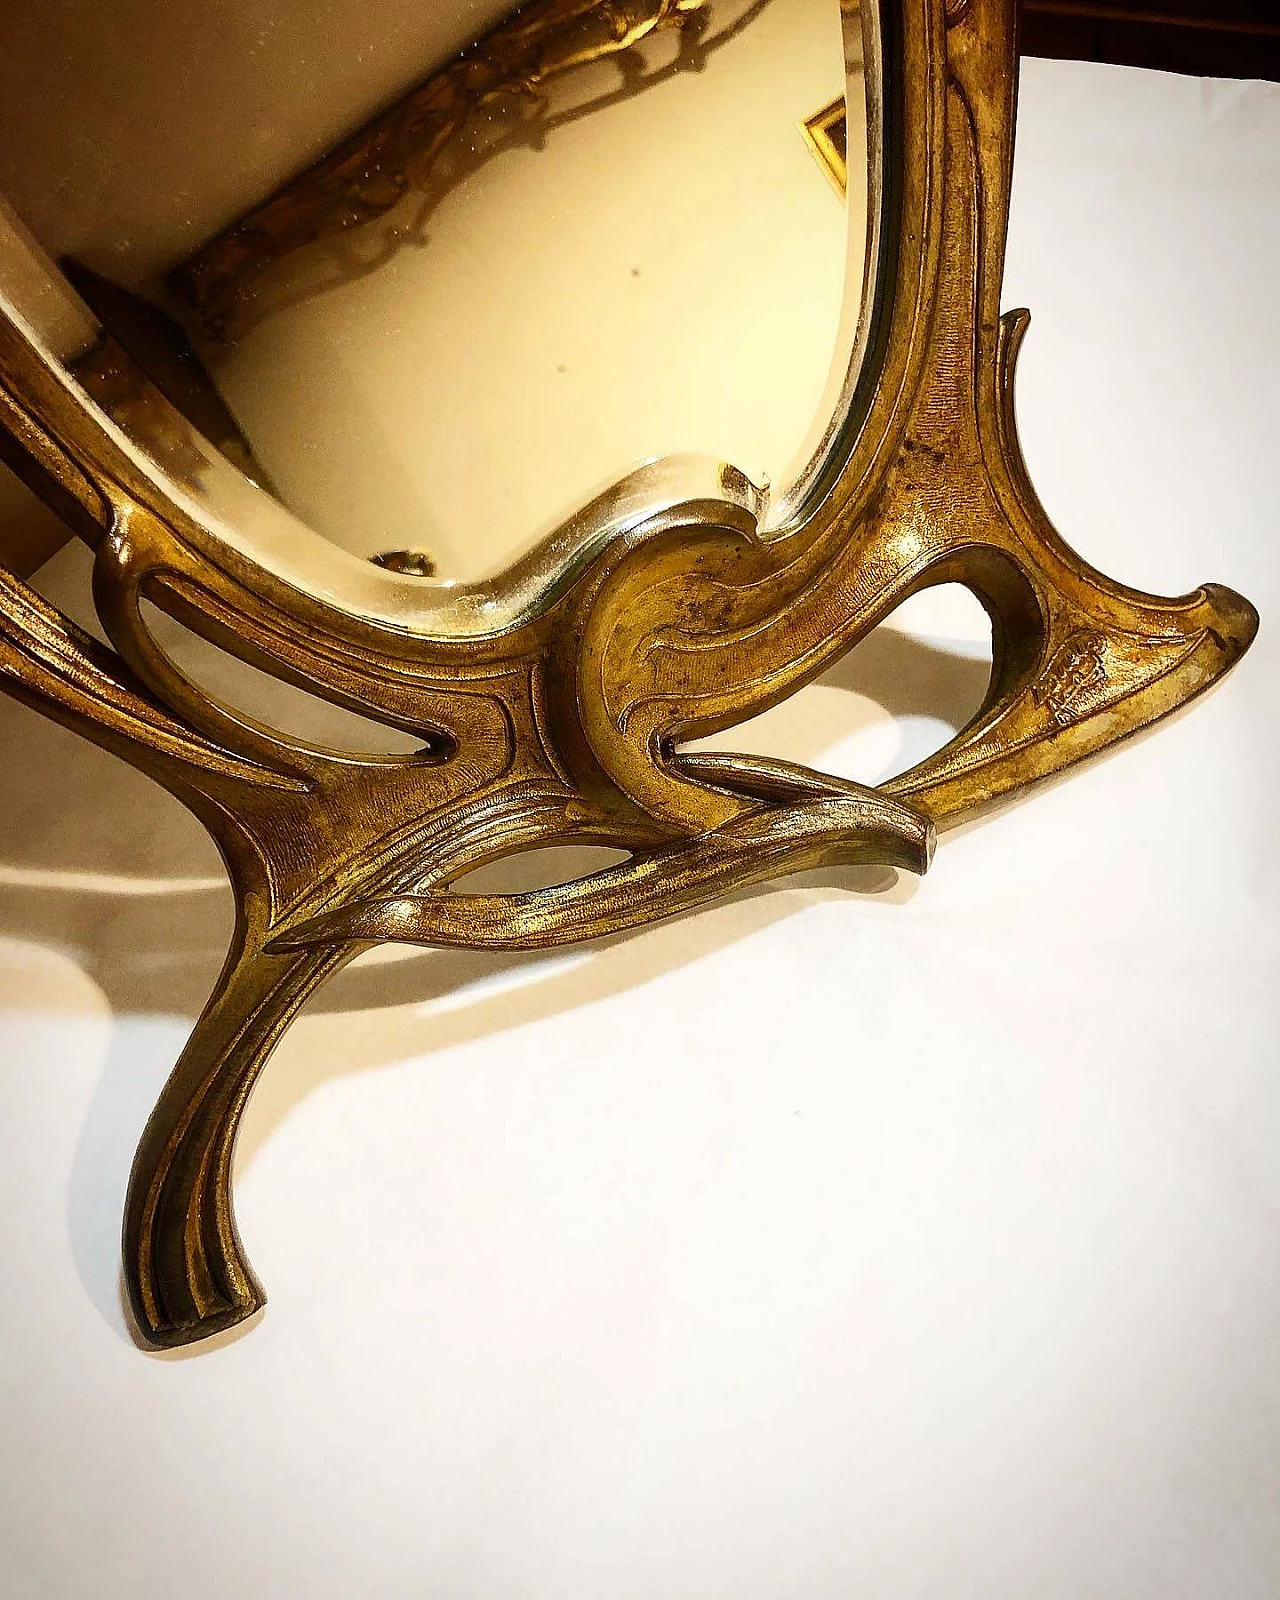 Art Nouveau gilded metal table mirror by Lauseur, early 1900s 1245821